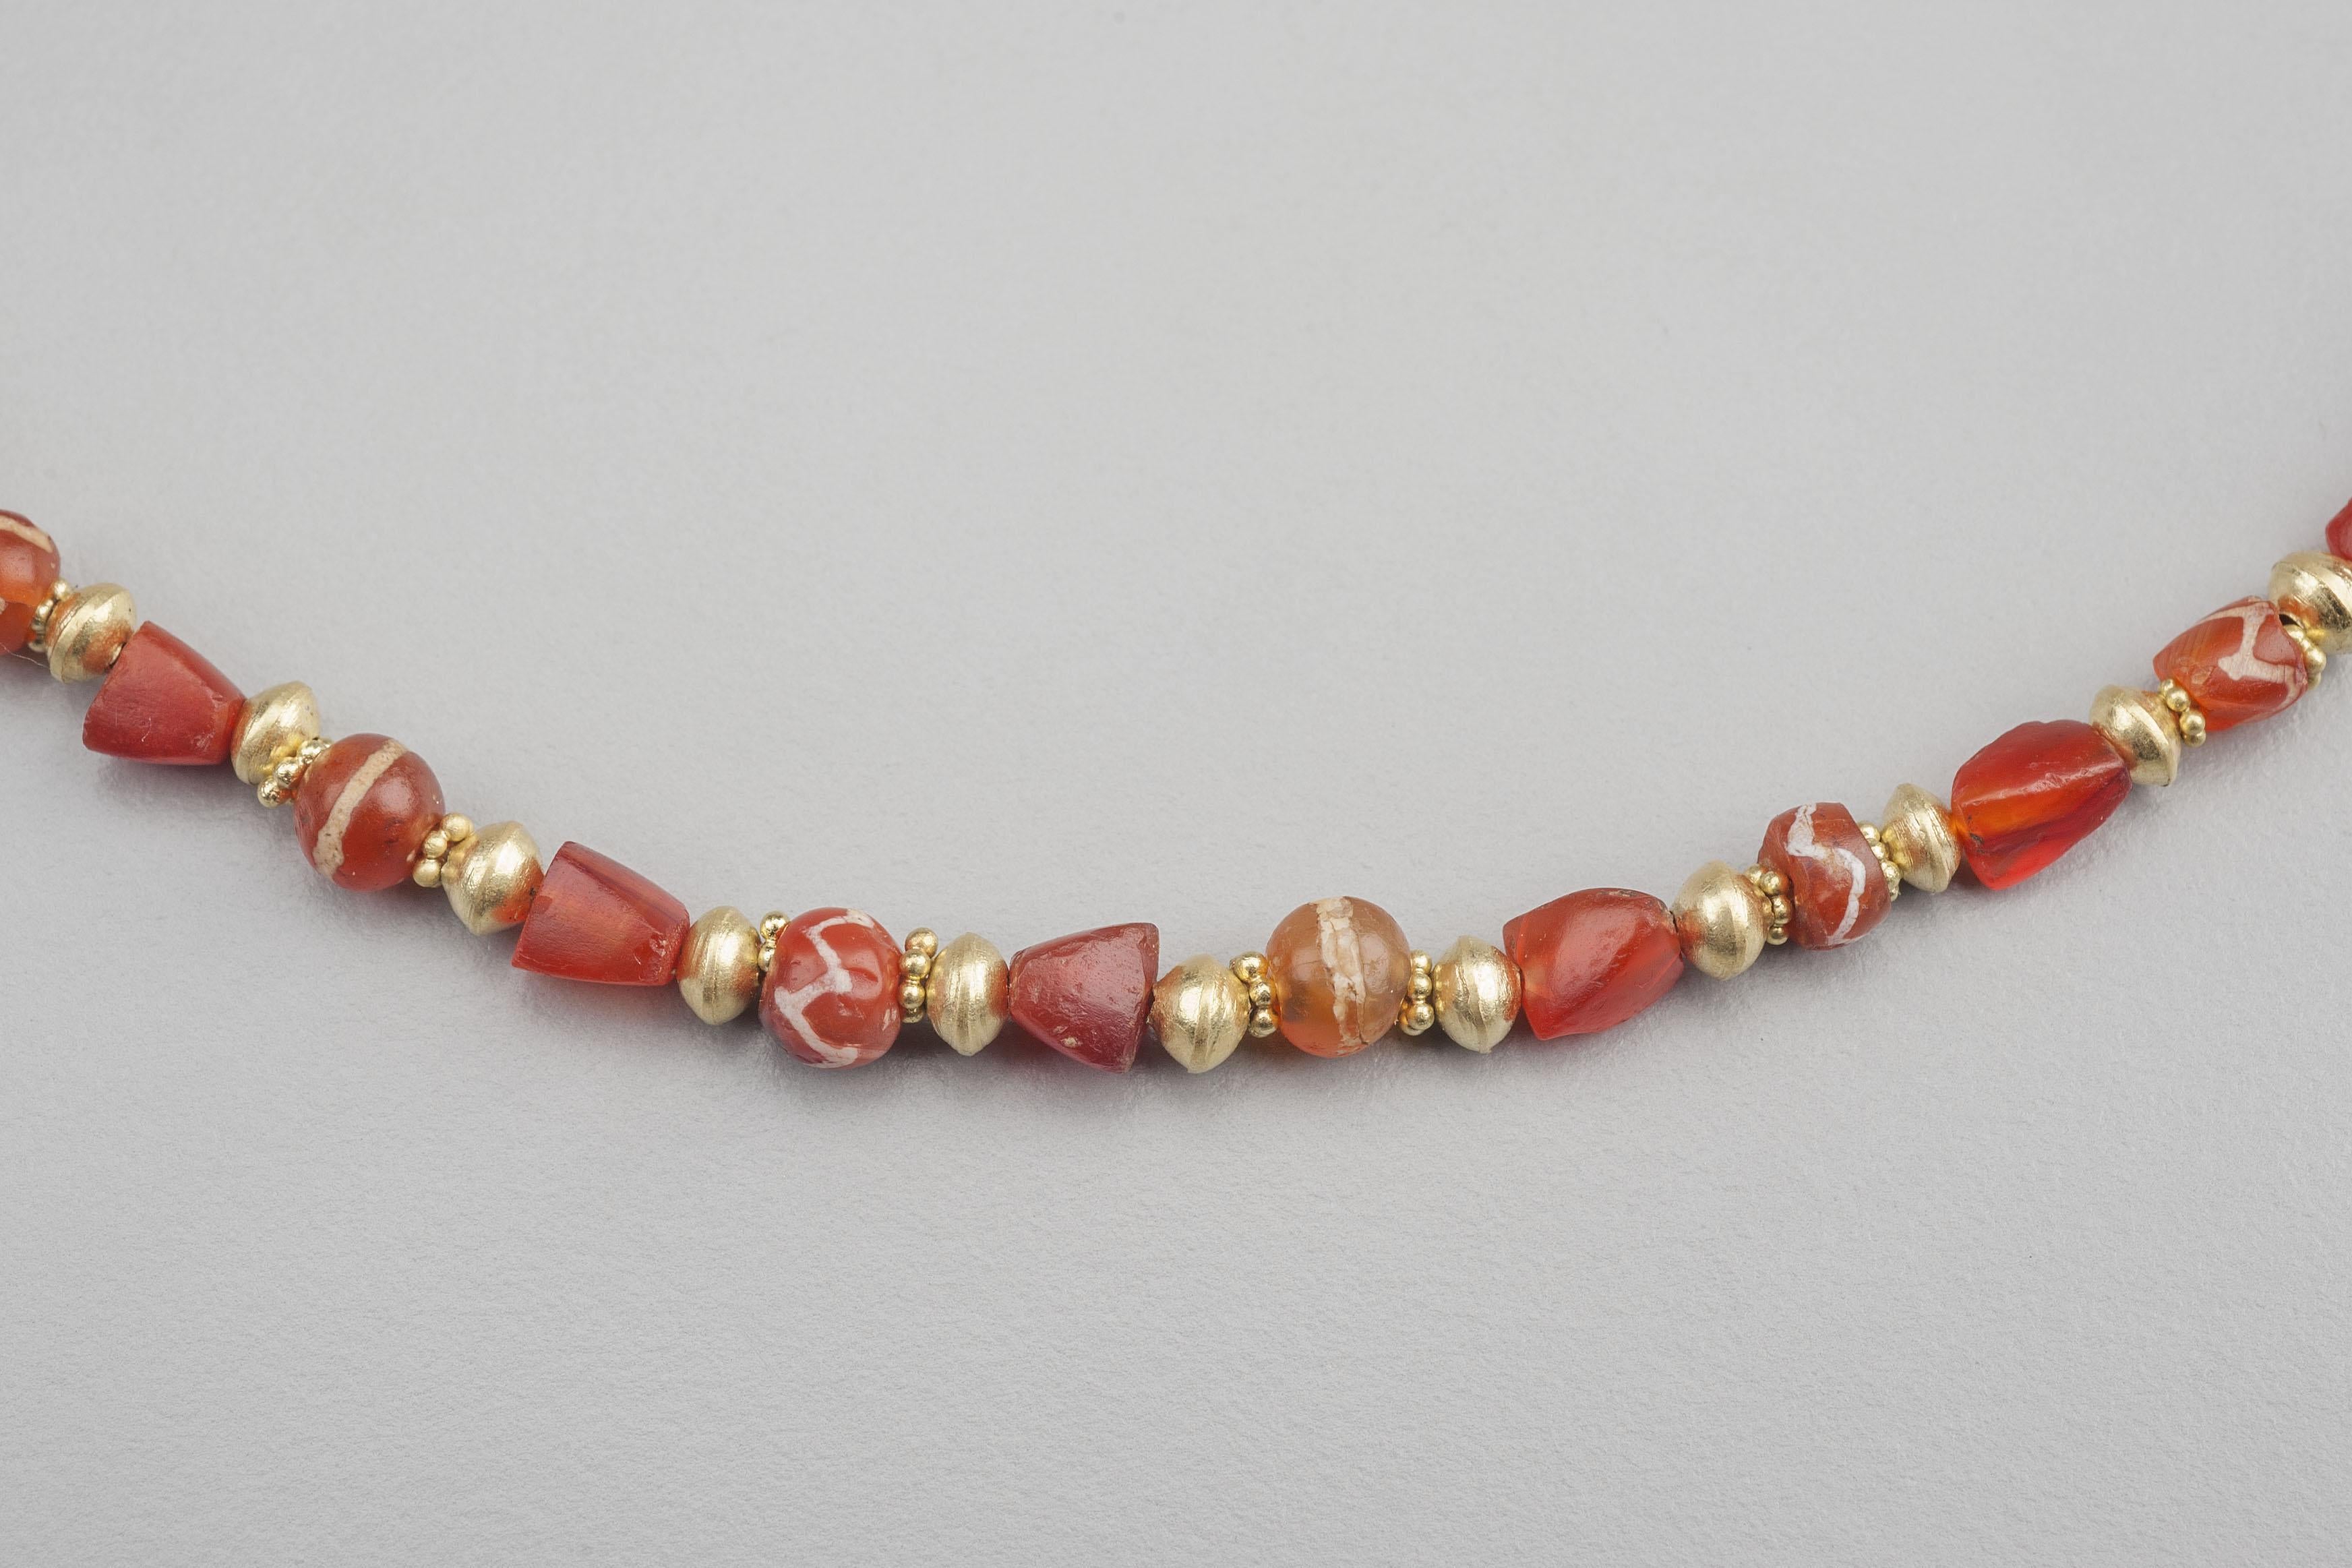 Fifty-nine carnelian beads alternating with fifty-eight round 20k gold beads. Of the carnelian beads, twenty-nine are artificially patterned round beads, (called “etched”), and thirty are undecorated carnelian beads with alternating trapezoidal